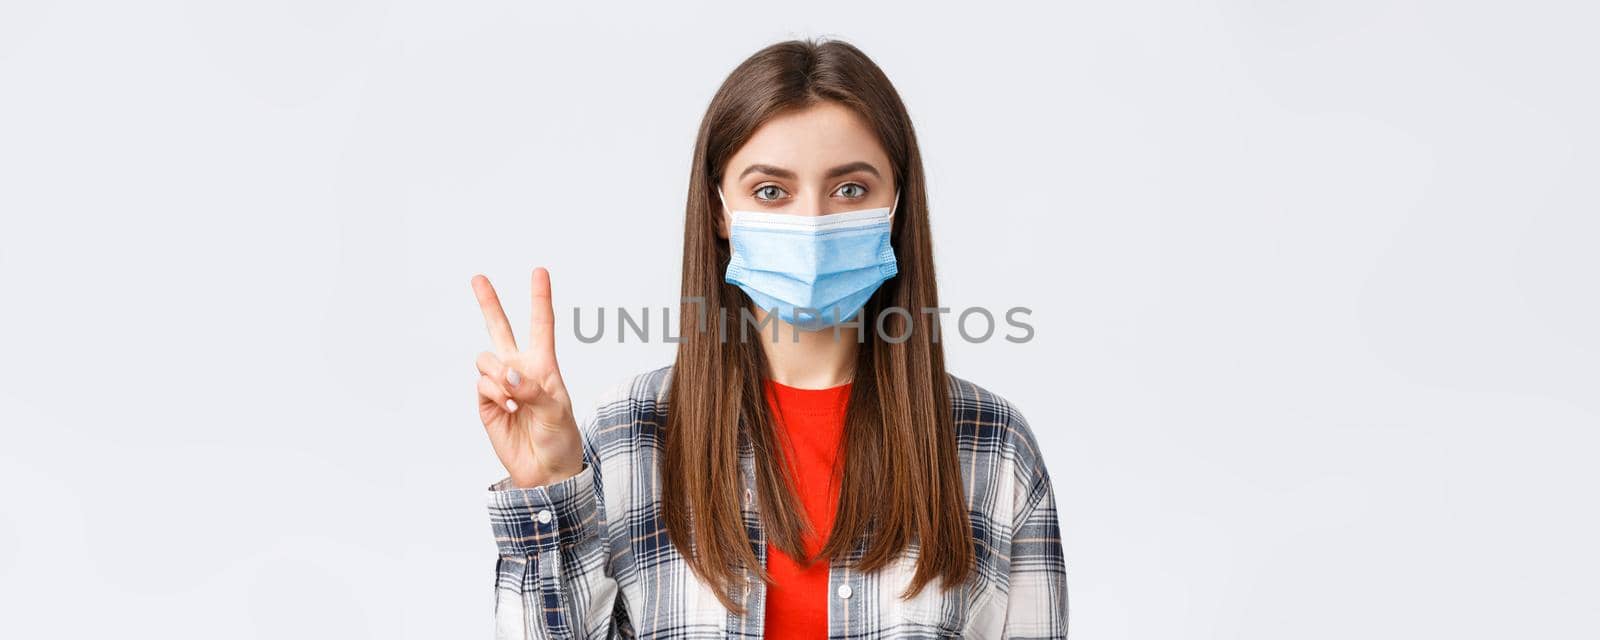 Coronavirus outbreak, leisure on quarantine, social distancing and emotions concept. Close-up of cute caucasian woman in medical mask making order, reservation for two, show number.